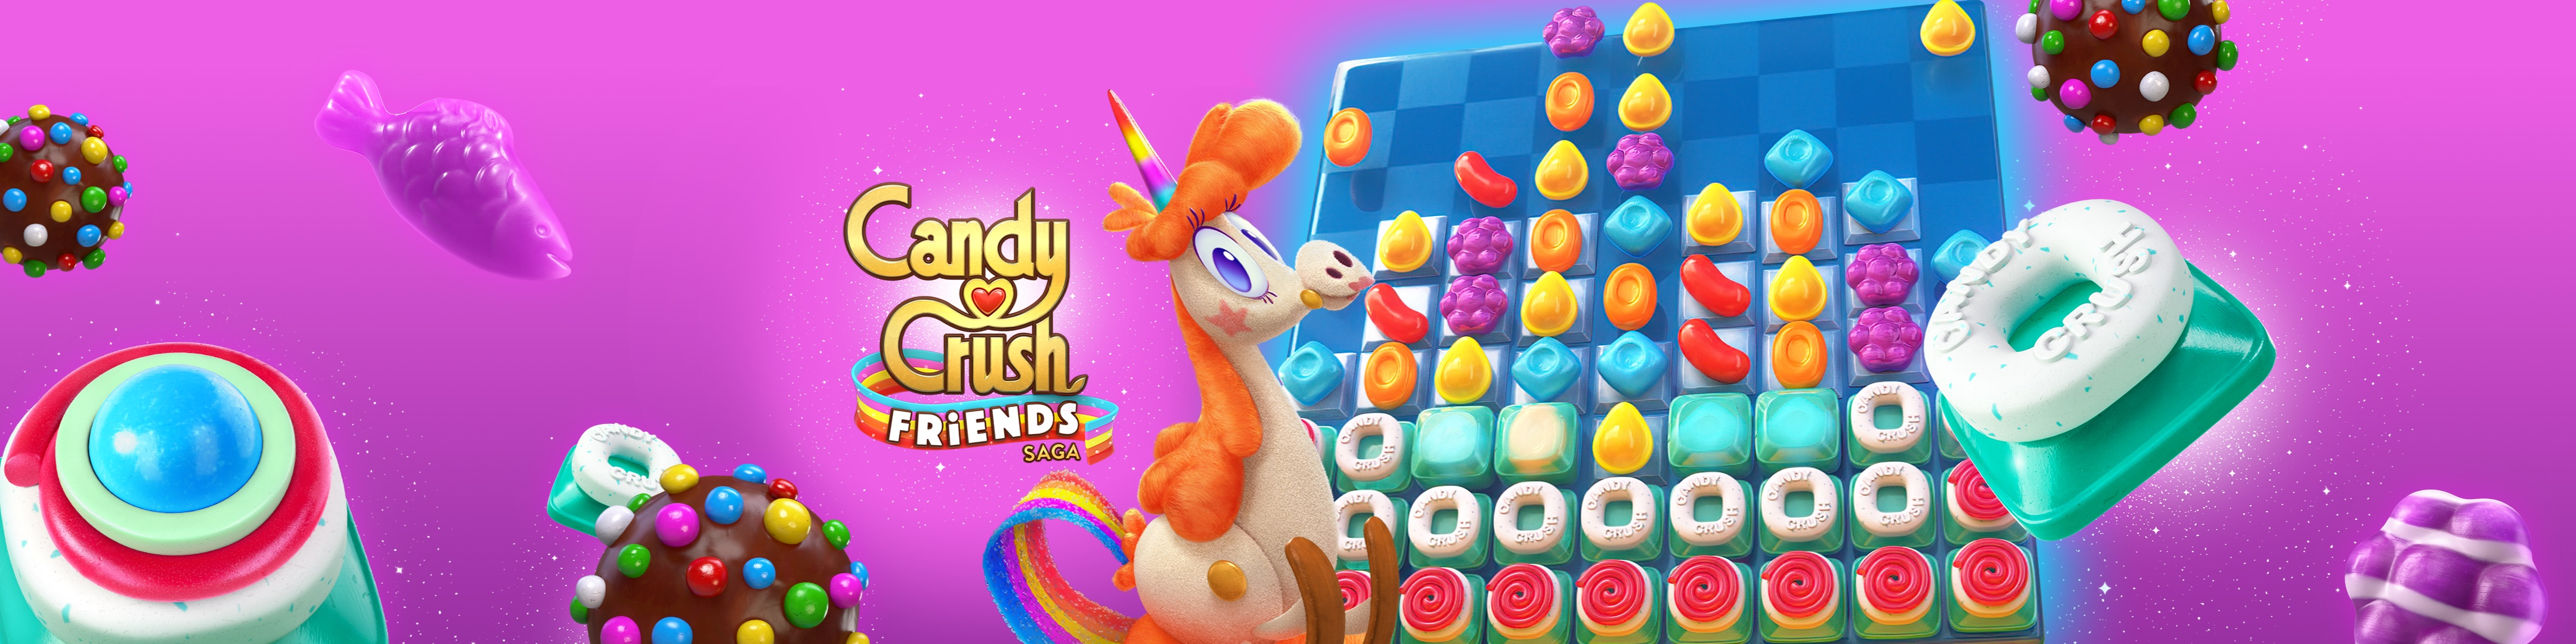 How Does Candy Crush Make Money? Examining Their Business Model